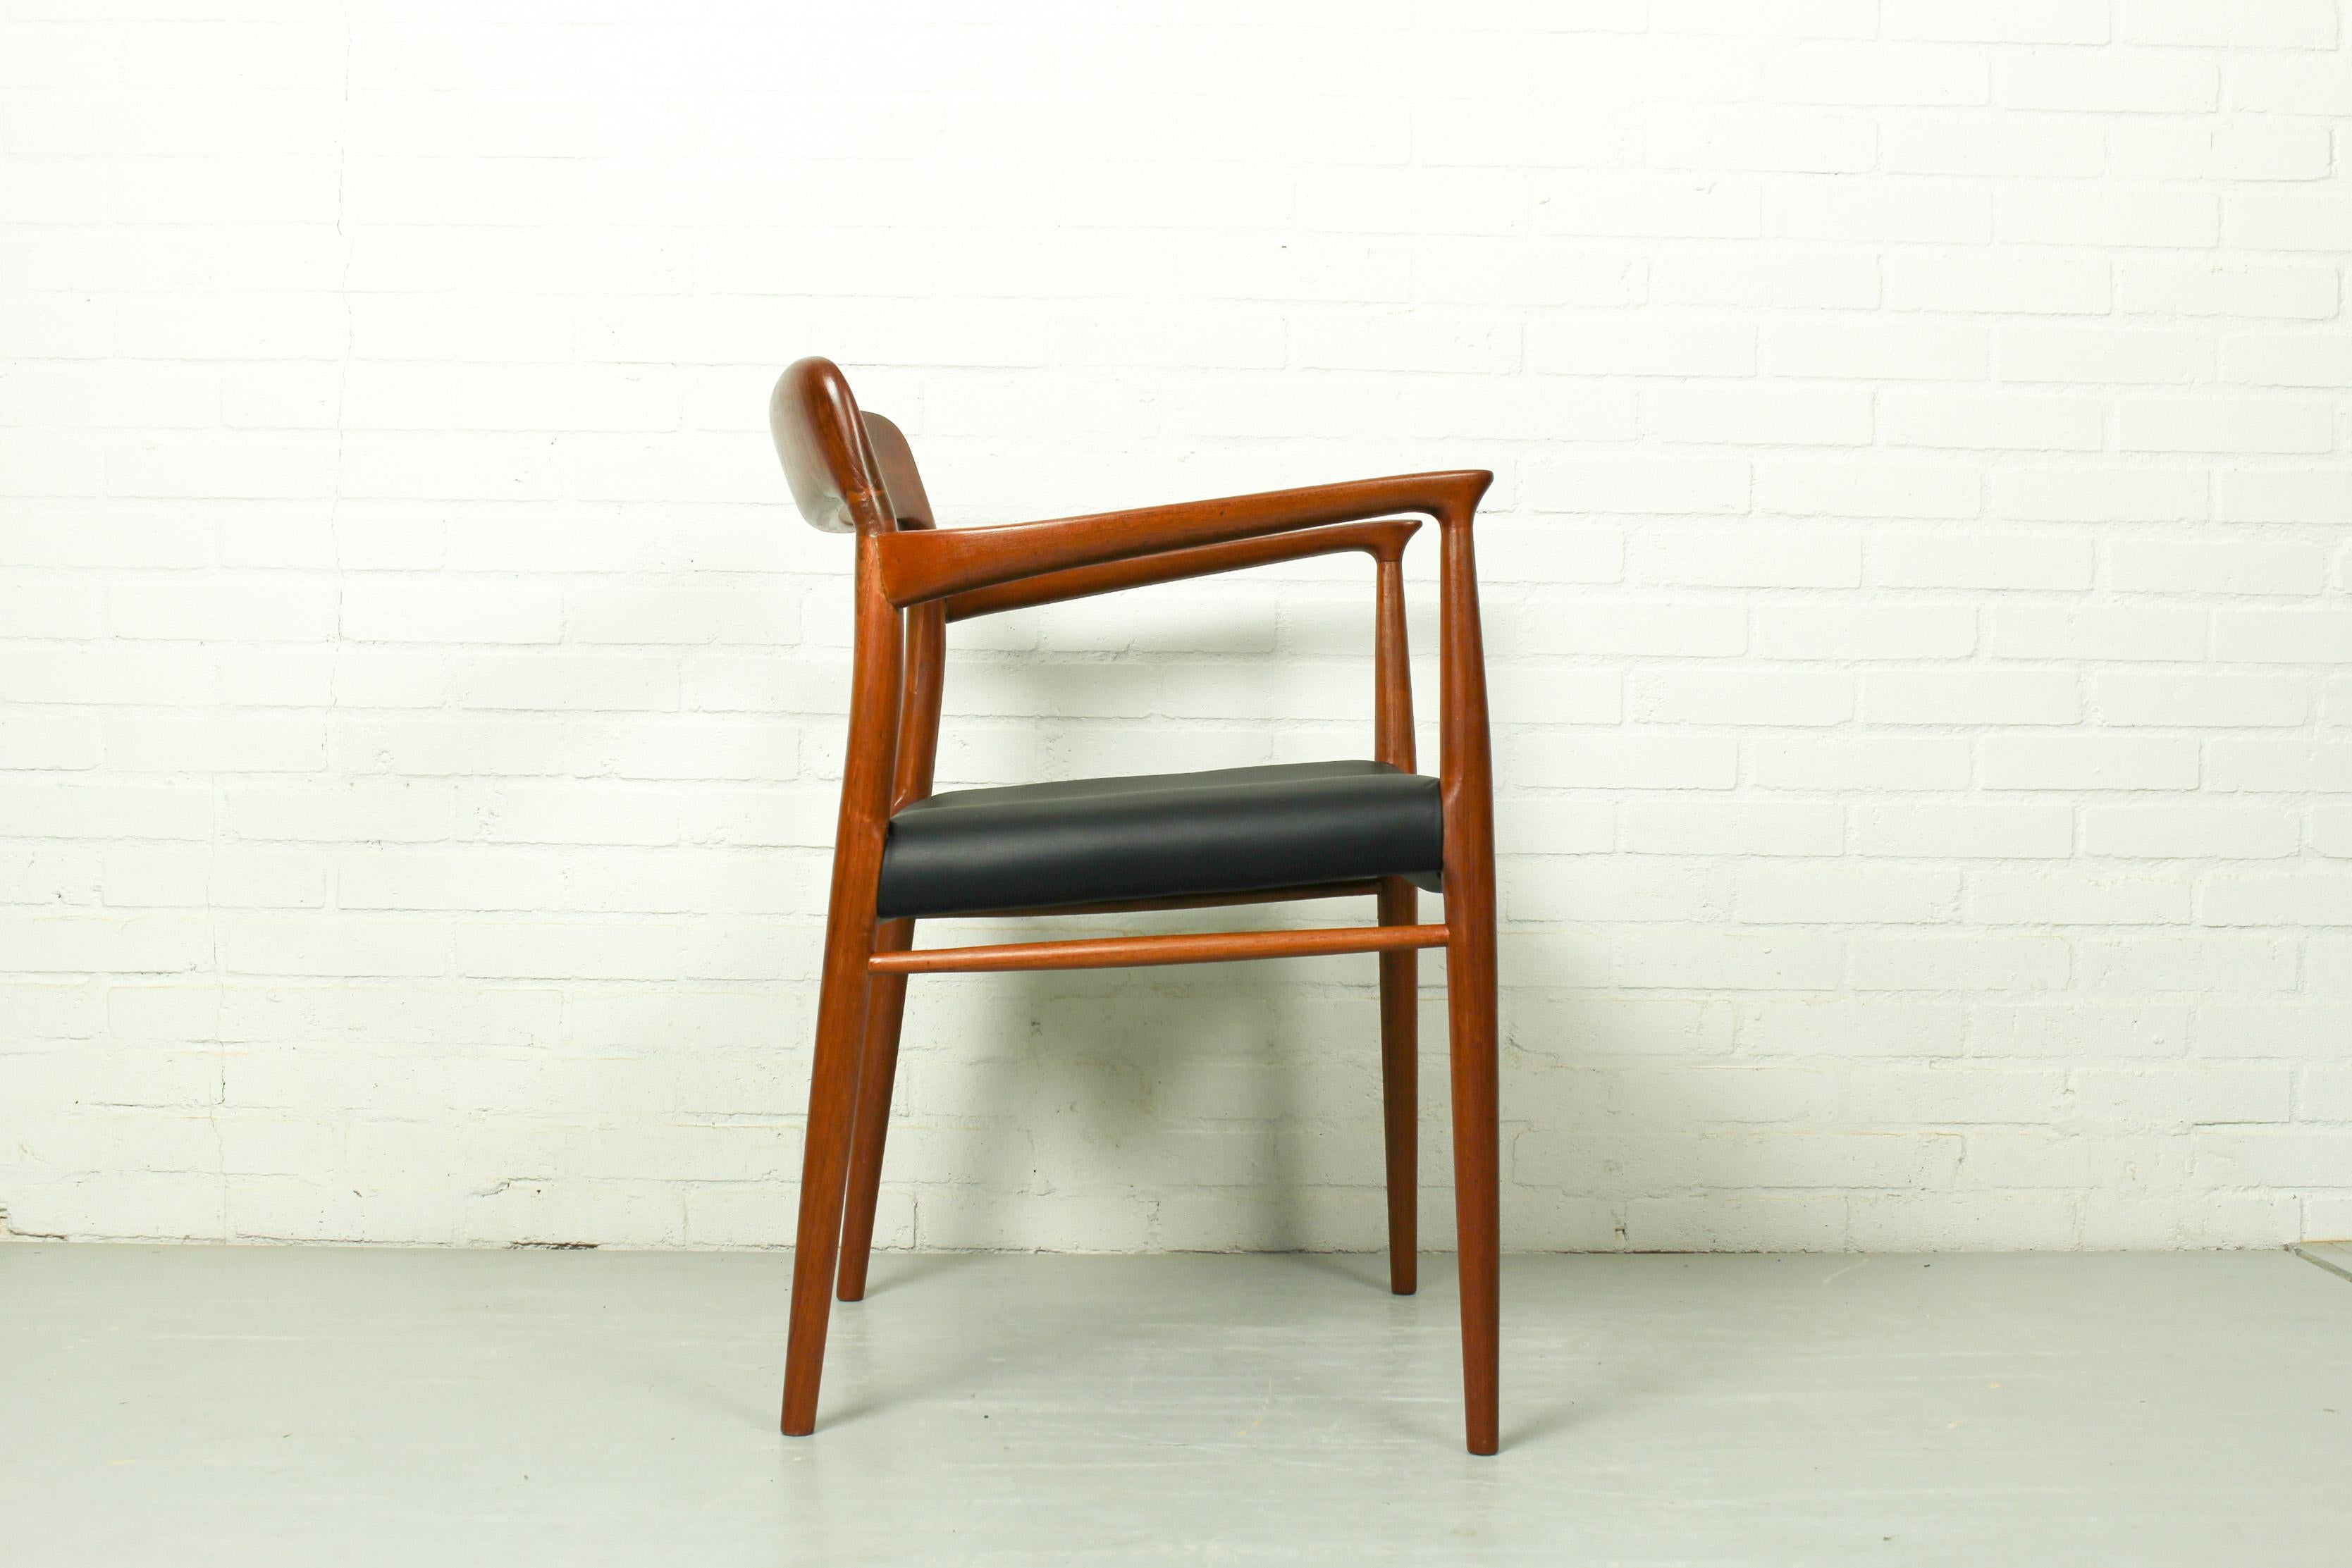 Dining chair model 65 in solid teak with new black leather seat. Designed by Niels Otto Møller and manufactured by J. L. Møller factory in the 1960s. This chair has traces of use and professional repairs in the teak back rest (as shown on pictures),